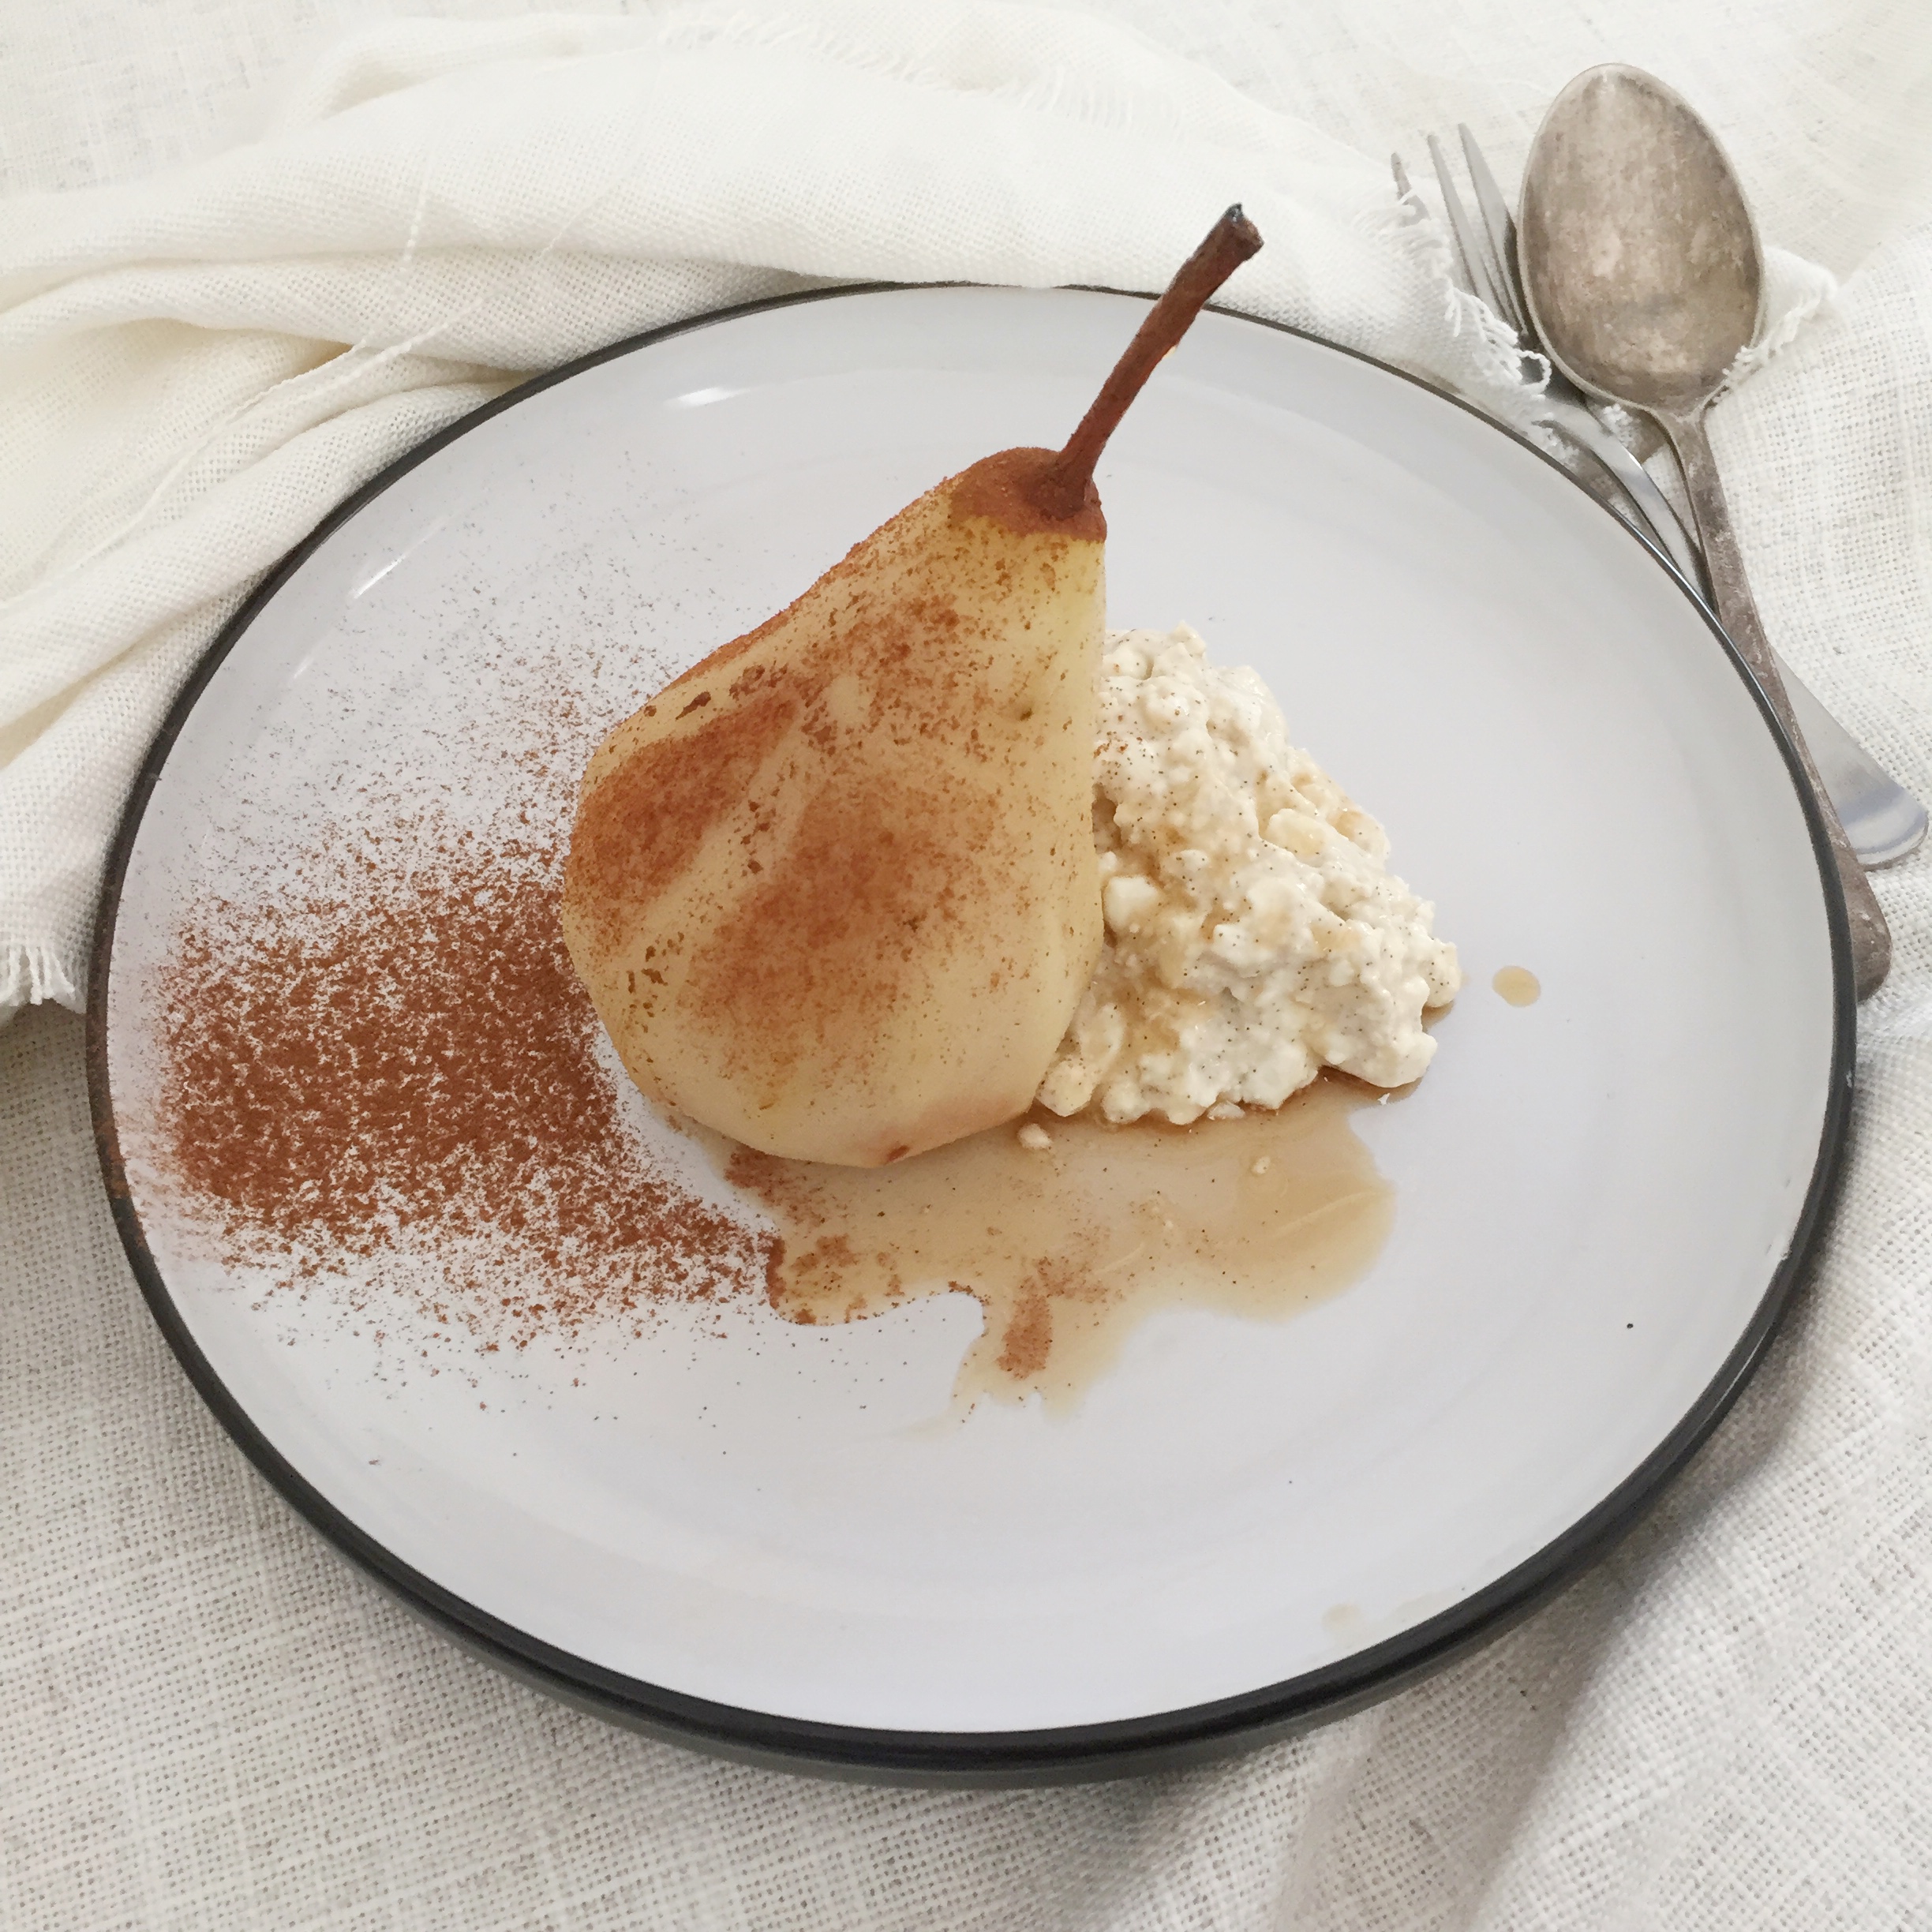 http://www.thehealthyjourney.com.au/maple-and-cinnamon-poached-pears-with-vanilla-whipped-ricotta/